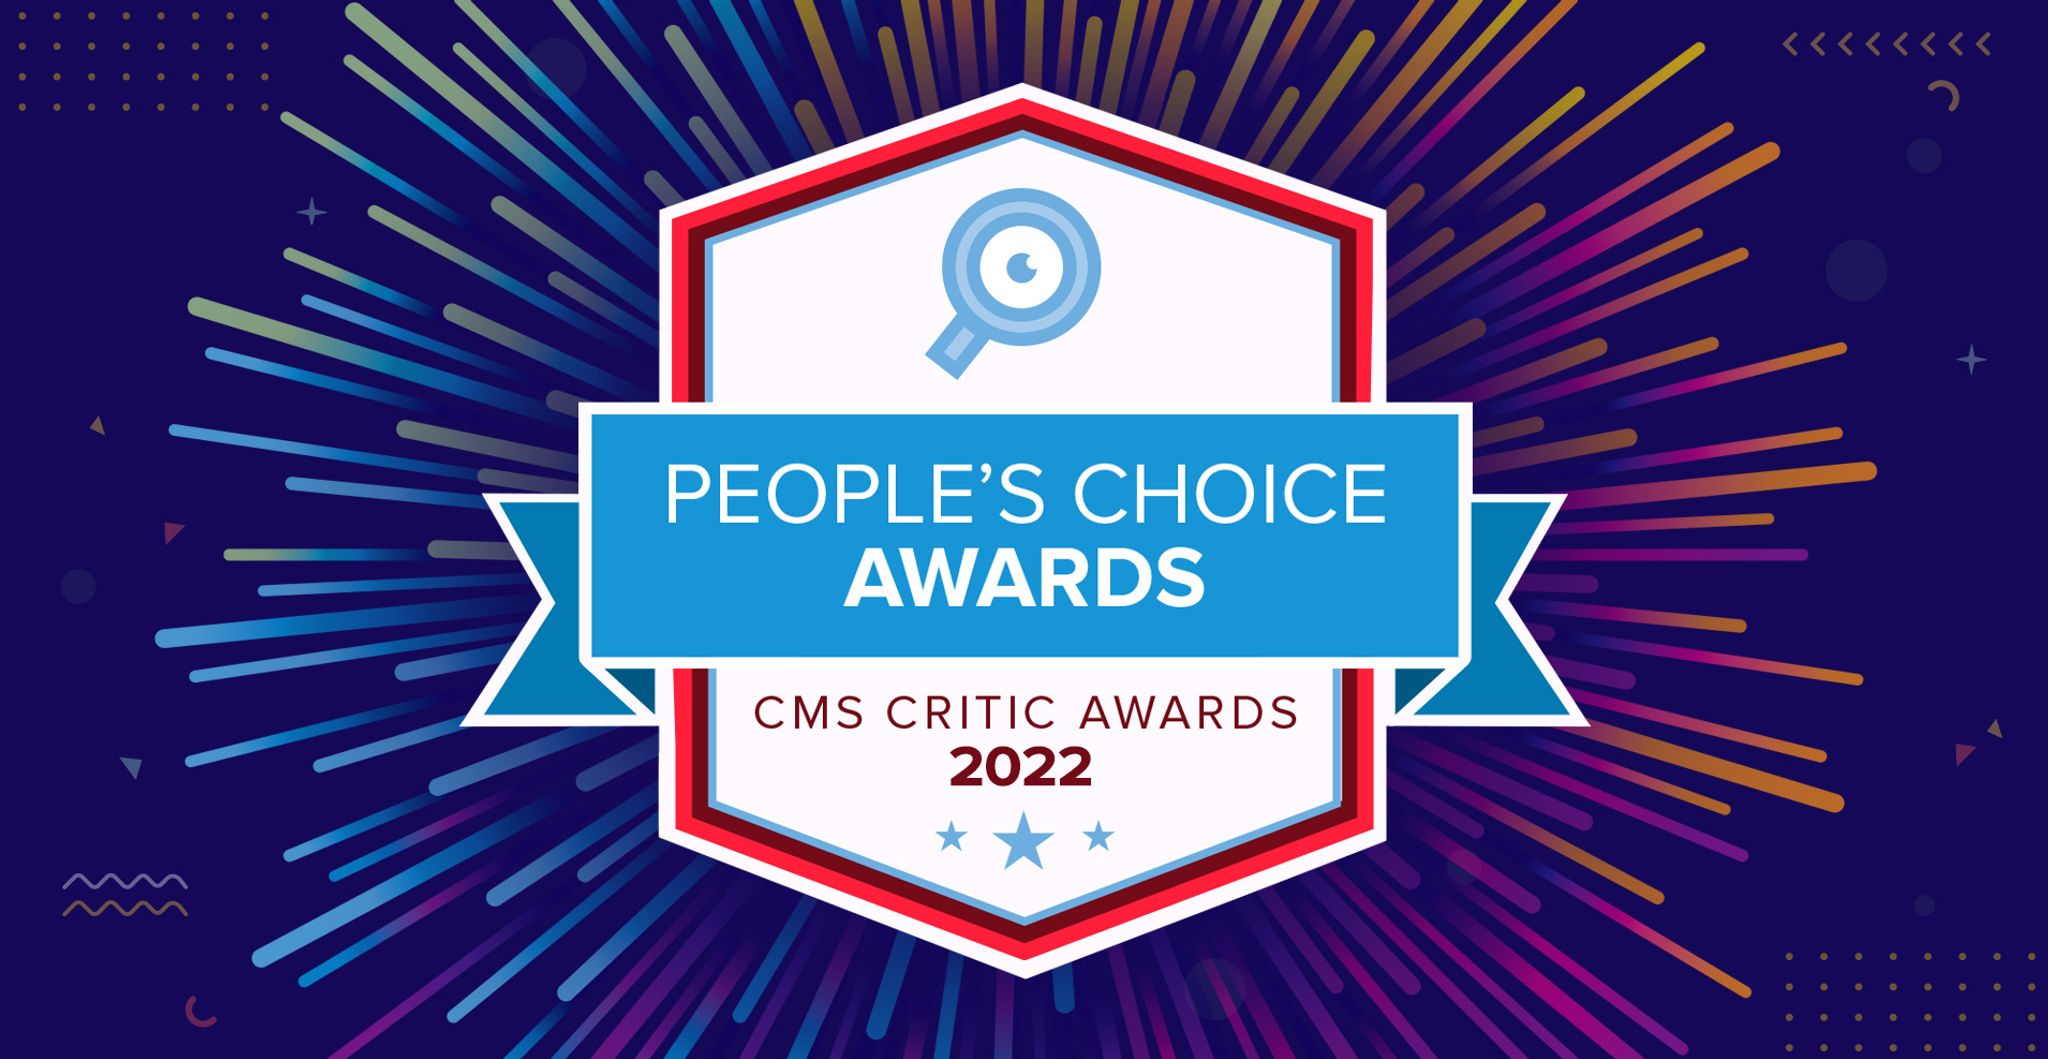 People's Choice Award 2022 logo against a graphical backdrop of fireworks